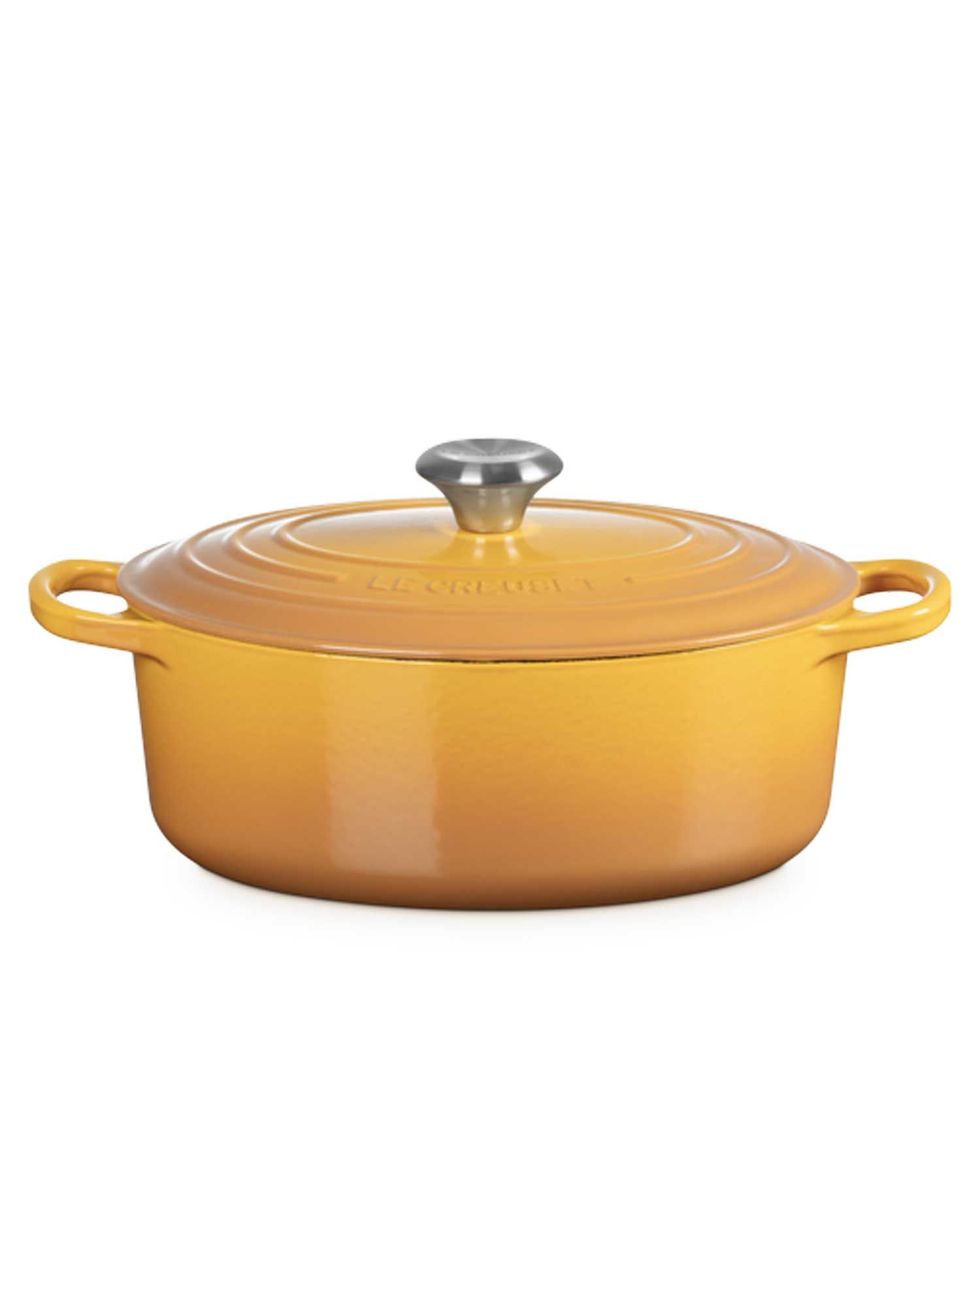 Le Creuset reveals its latest colourway 'Nectar